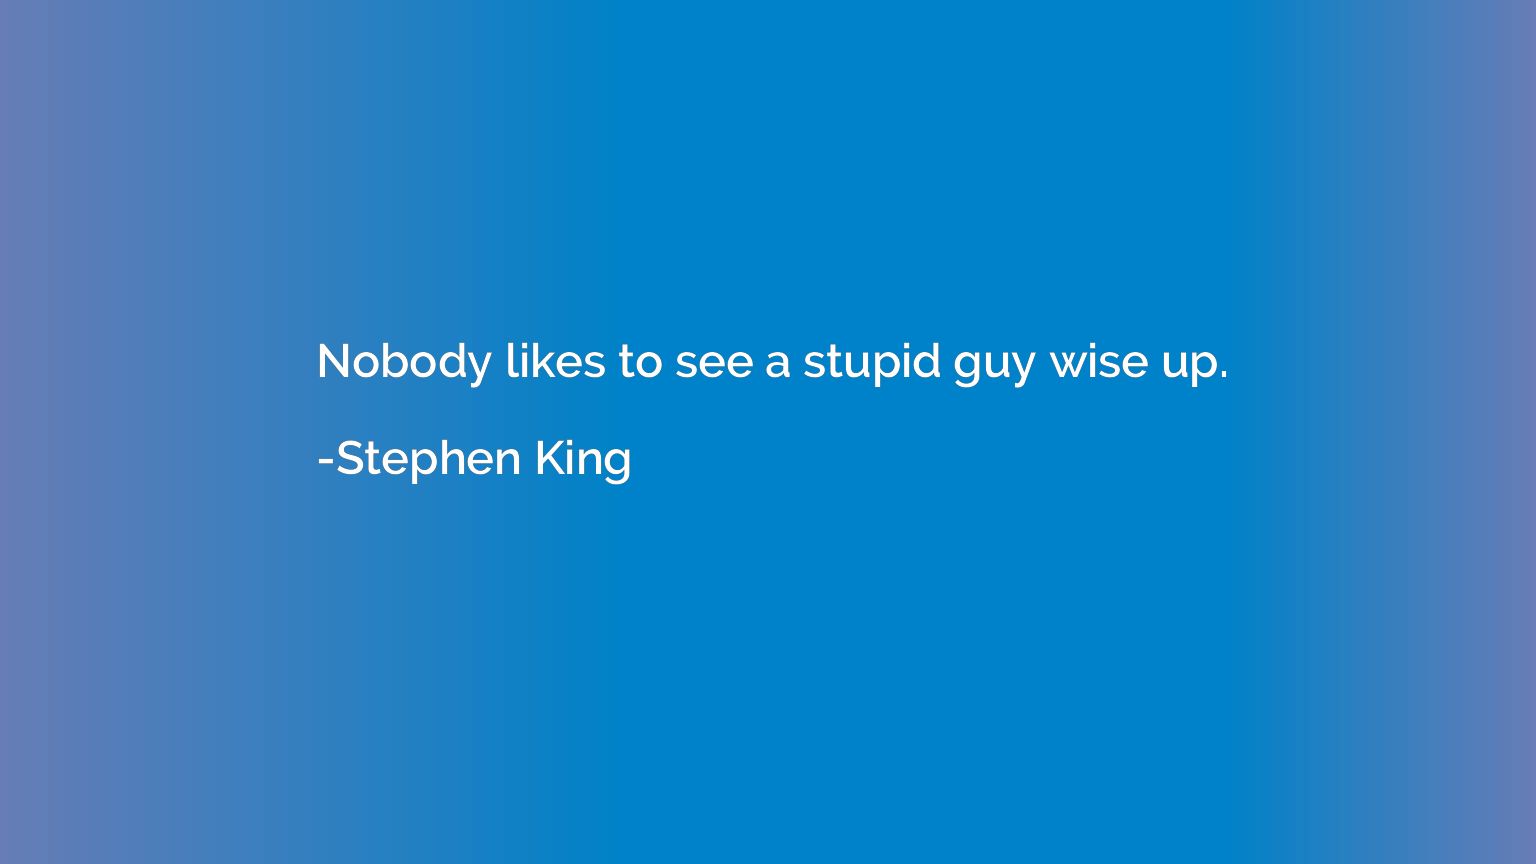 Nobody likes to see a stupid guy wise up.